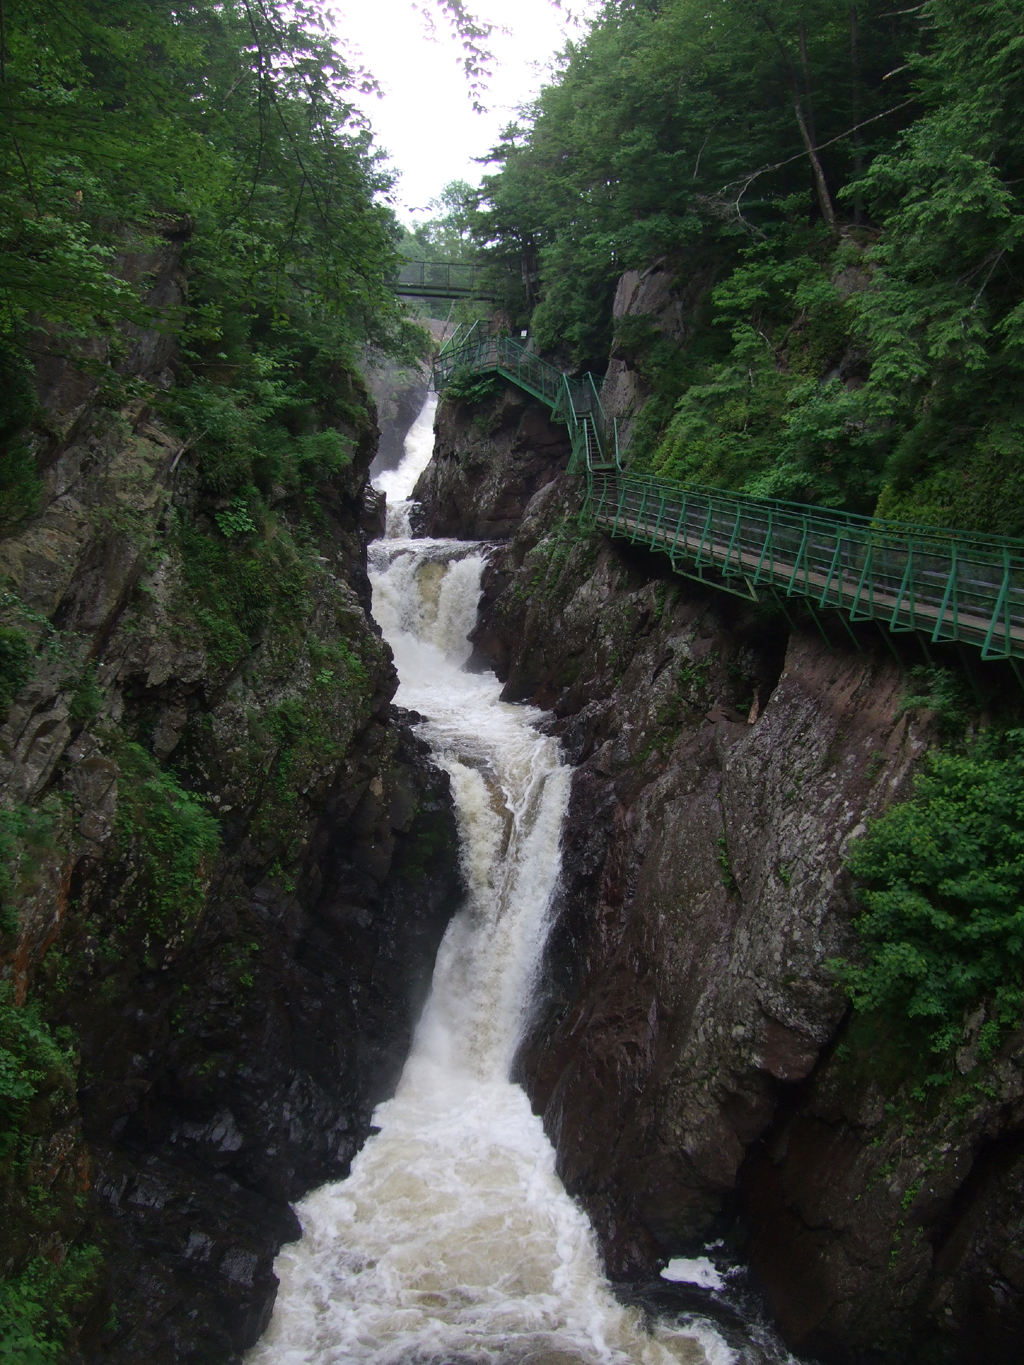 Water cascading through the Flume Gorge. A green walkway scales the side.